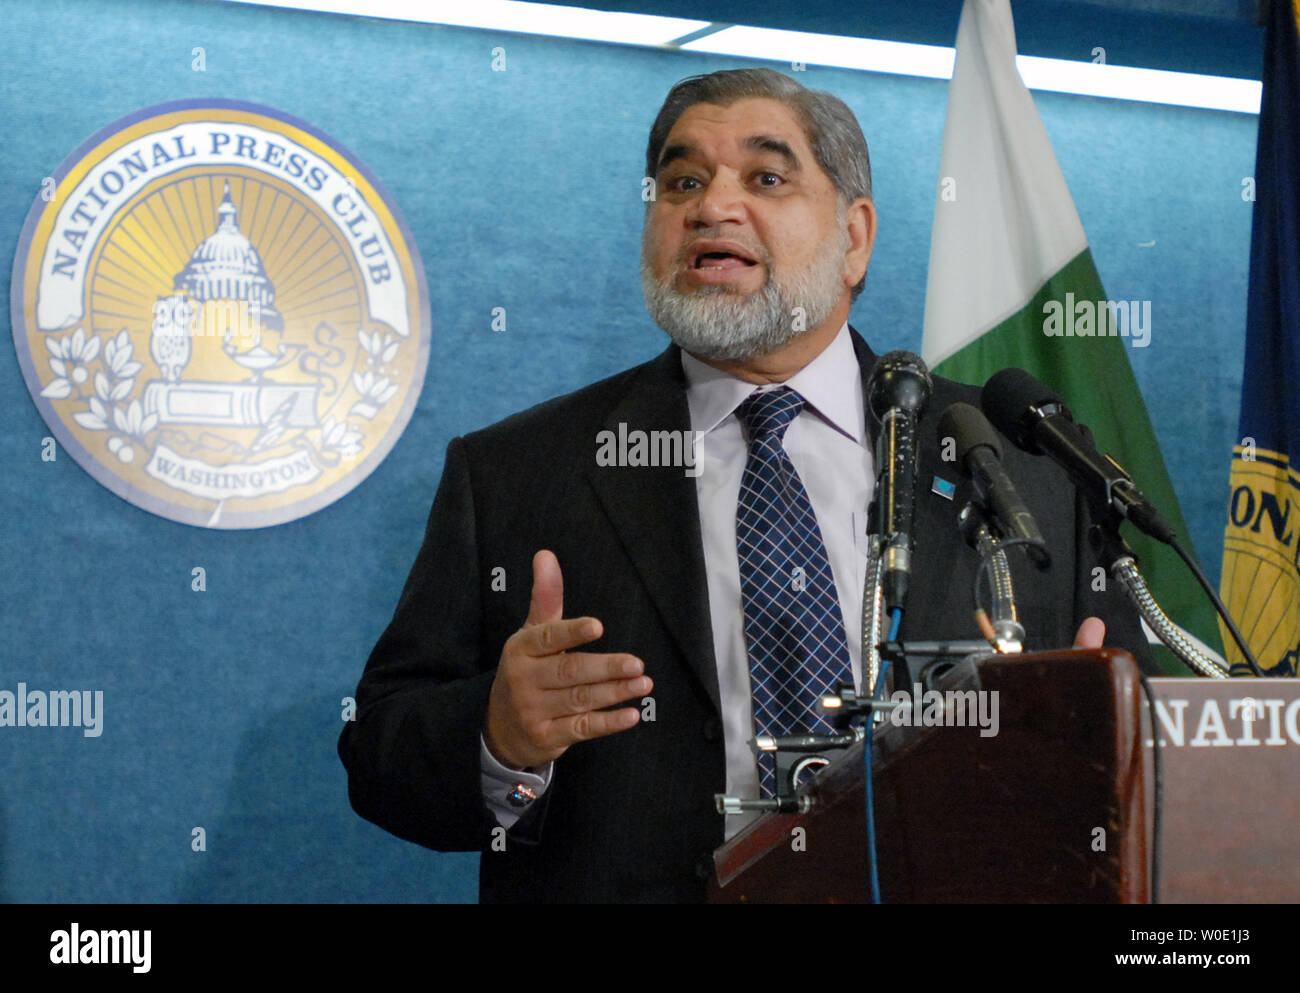 **CAPTION CLARIFICATION** Pakistan's former President of the Supreme Court Bar Association Sheikh Akram speaks at a news conference at the National Press Club in Washington on November 14, 2007. Akram condemned Pakistan's President Pervez Musharraf for suspending the country's constitution and called on the American government to withdraw support Musharraf.   (UPI Photo/Alexis C. Glenn) Stock Photo